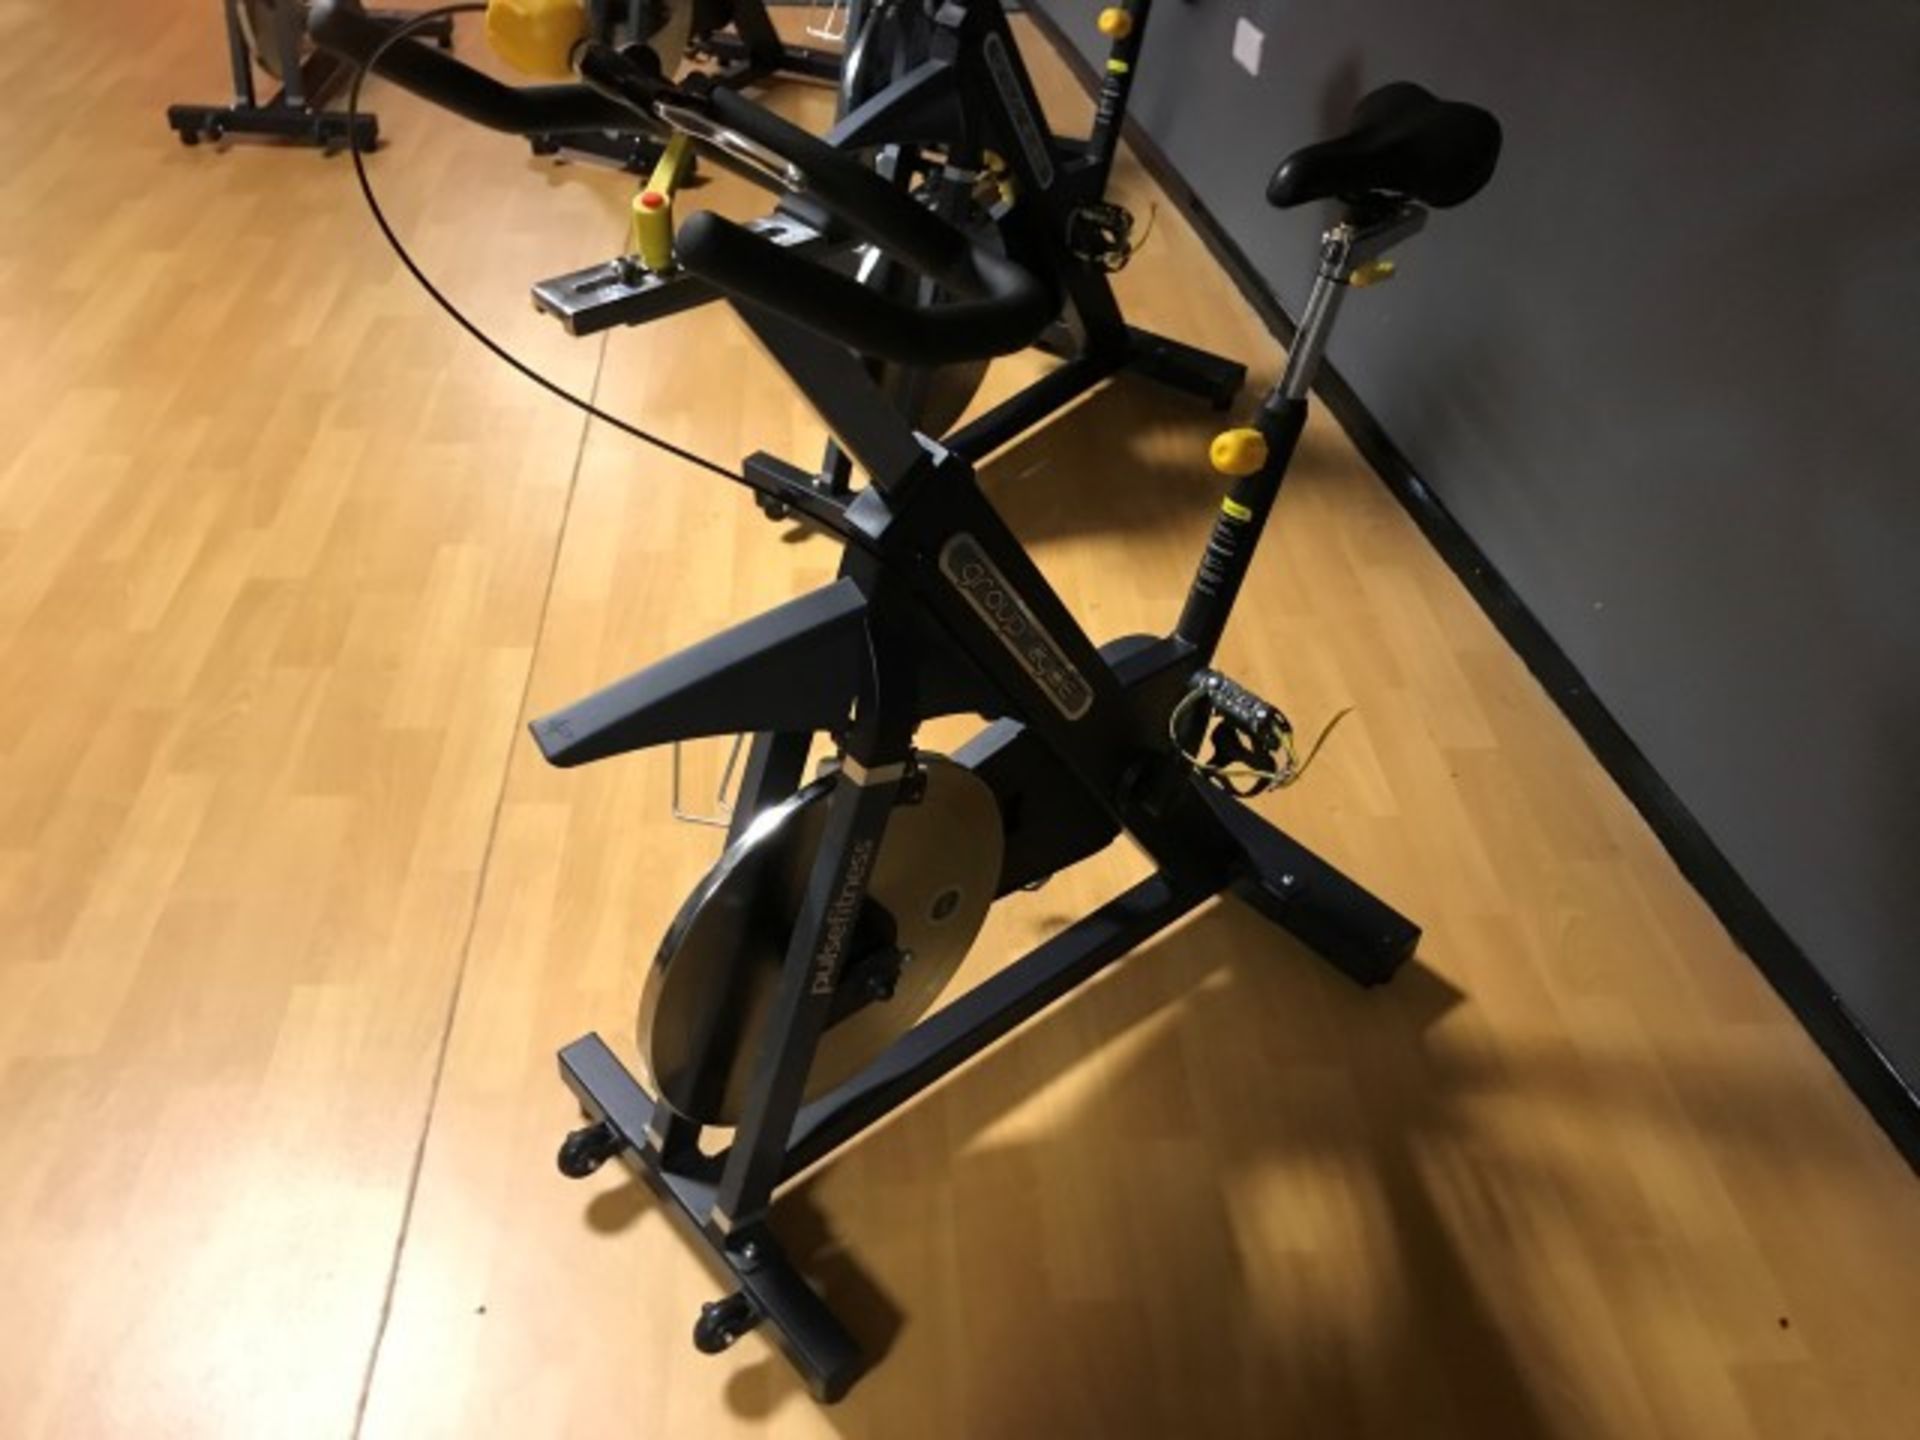 Pulse Fitness 225G Group Cycle spinning bicycle (2017) - Image 2 of 3